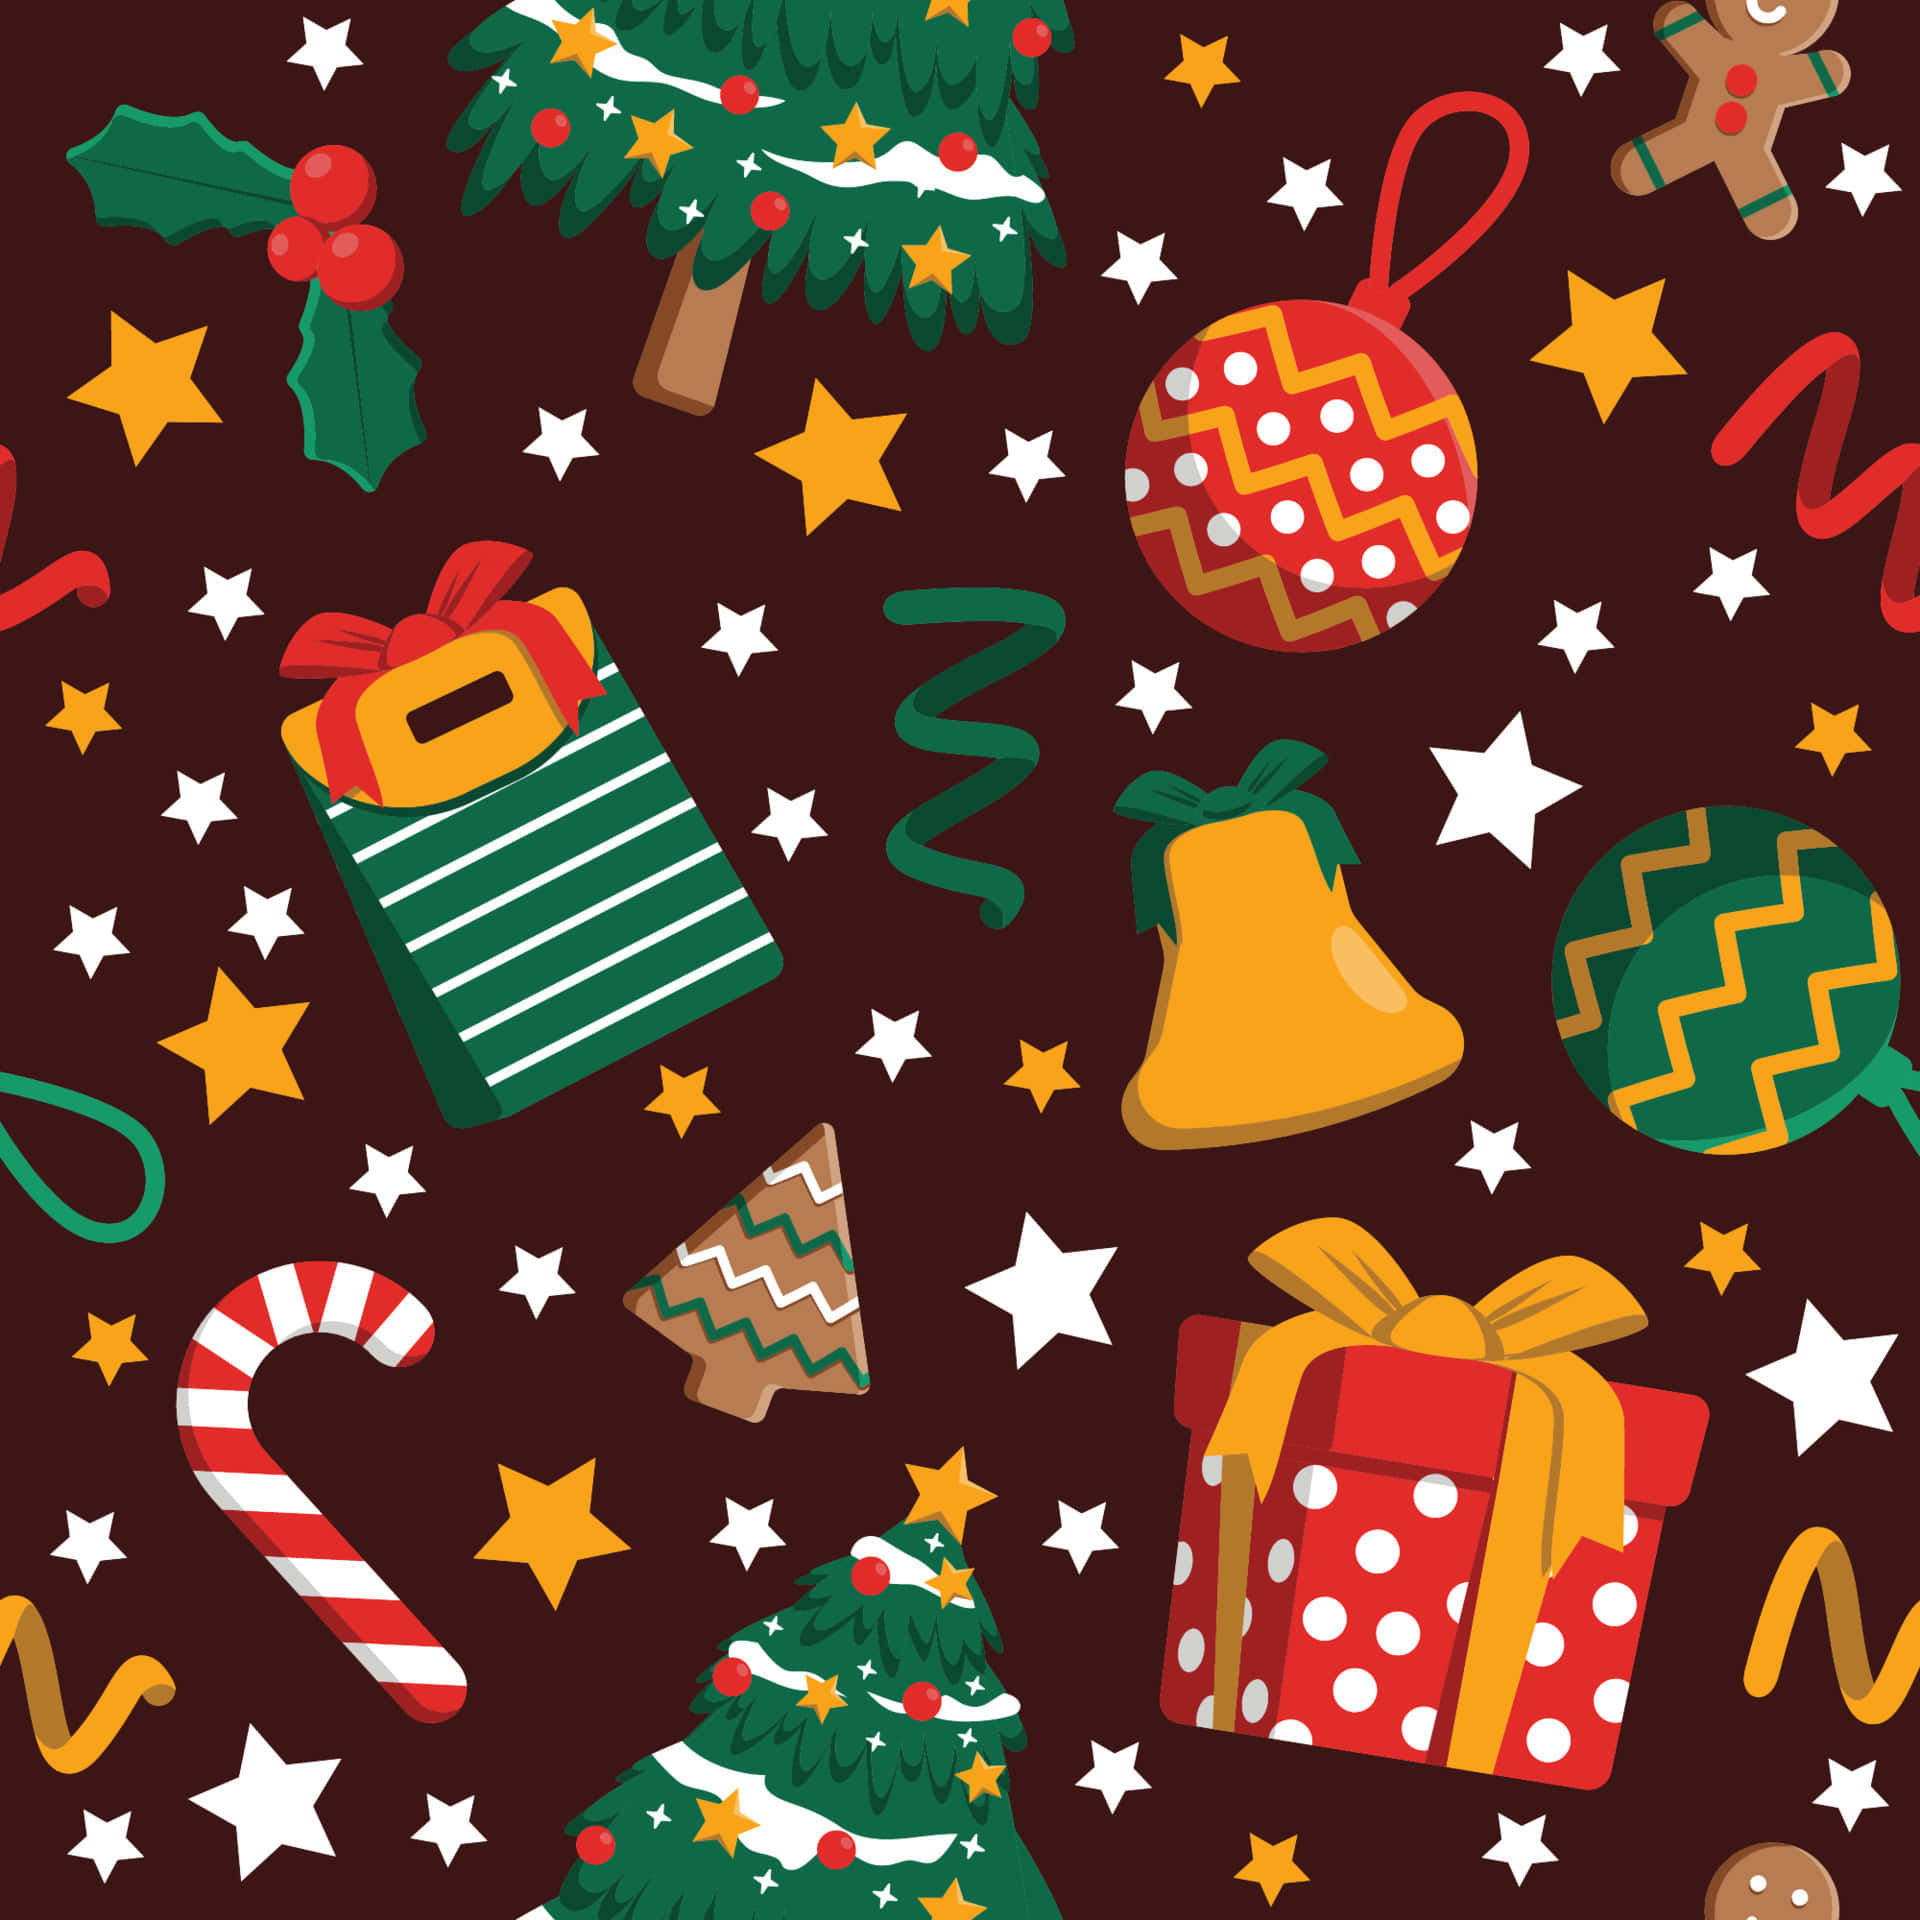 Wrap it up with a vintage Christmas Wallpaper